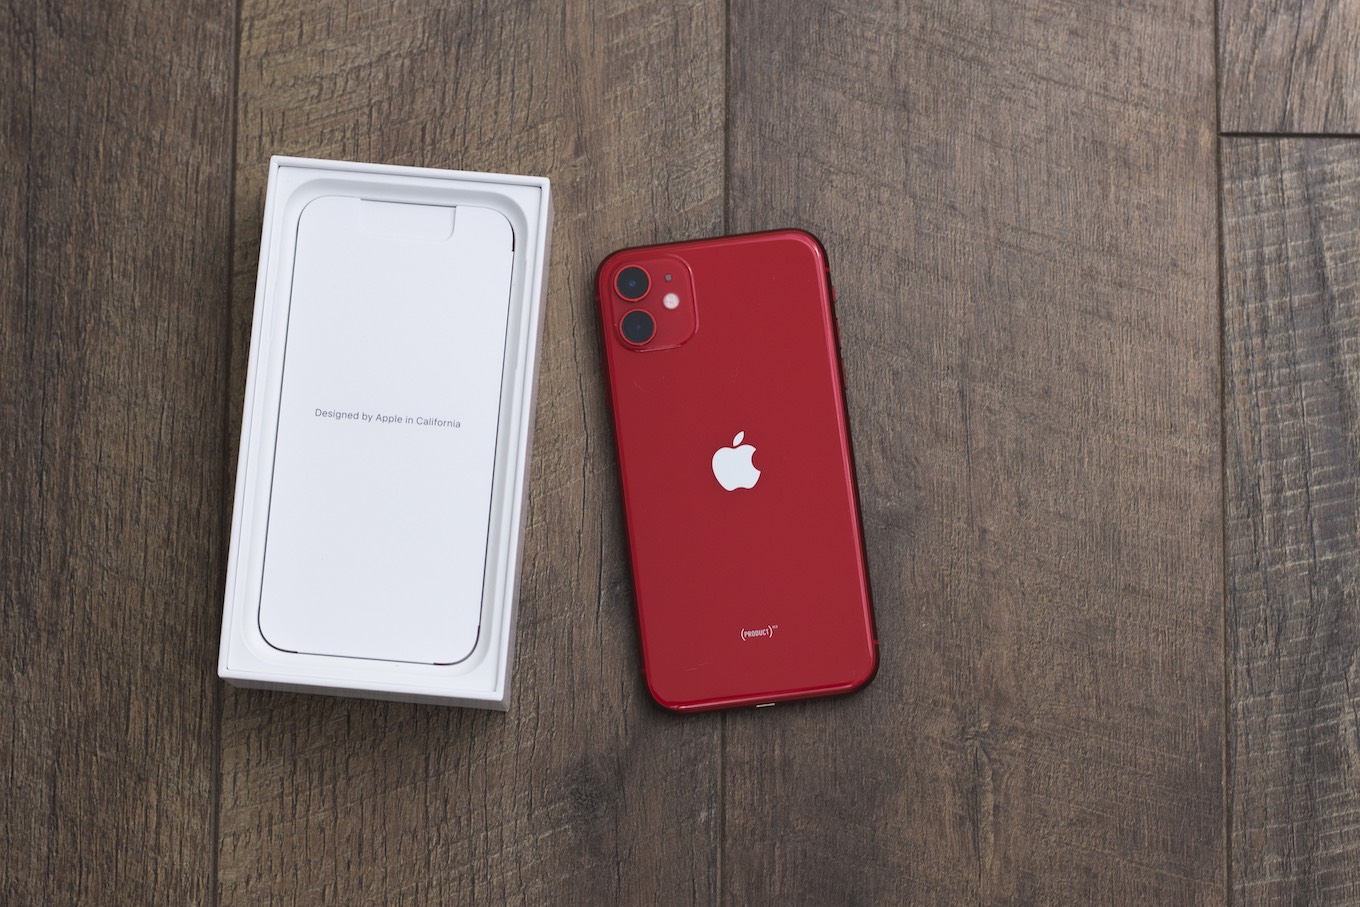 A red iPhone 11 laying next to its box on a wood surface.